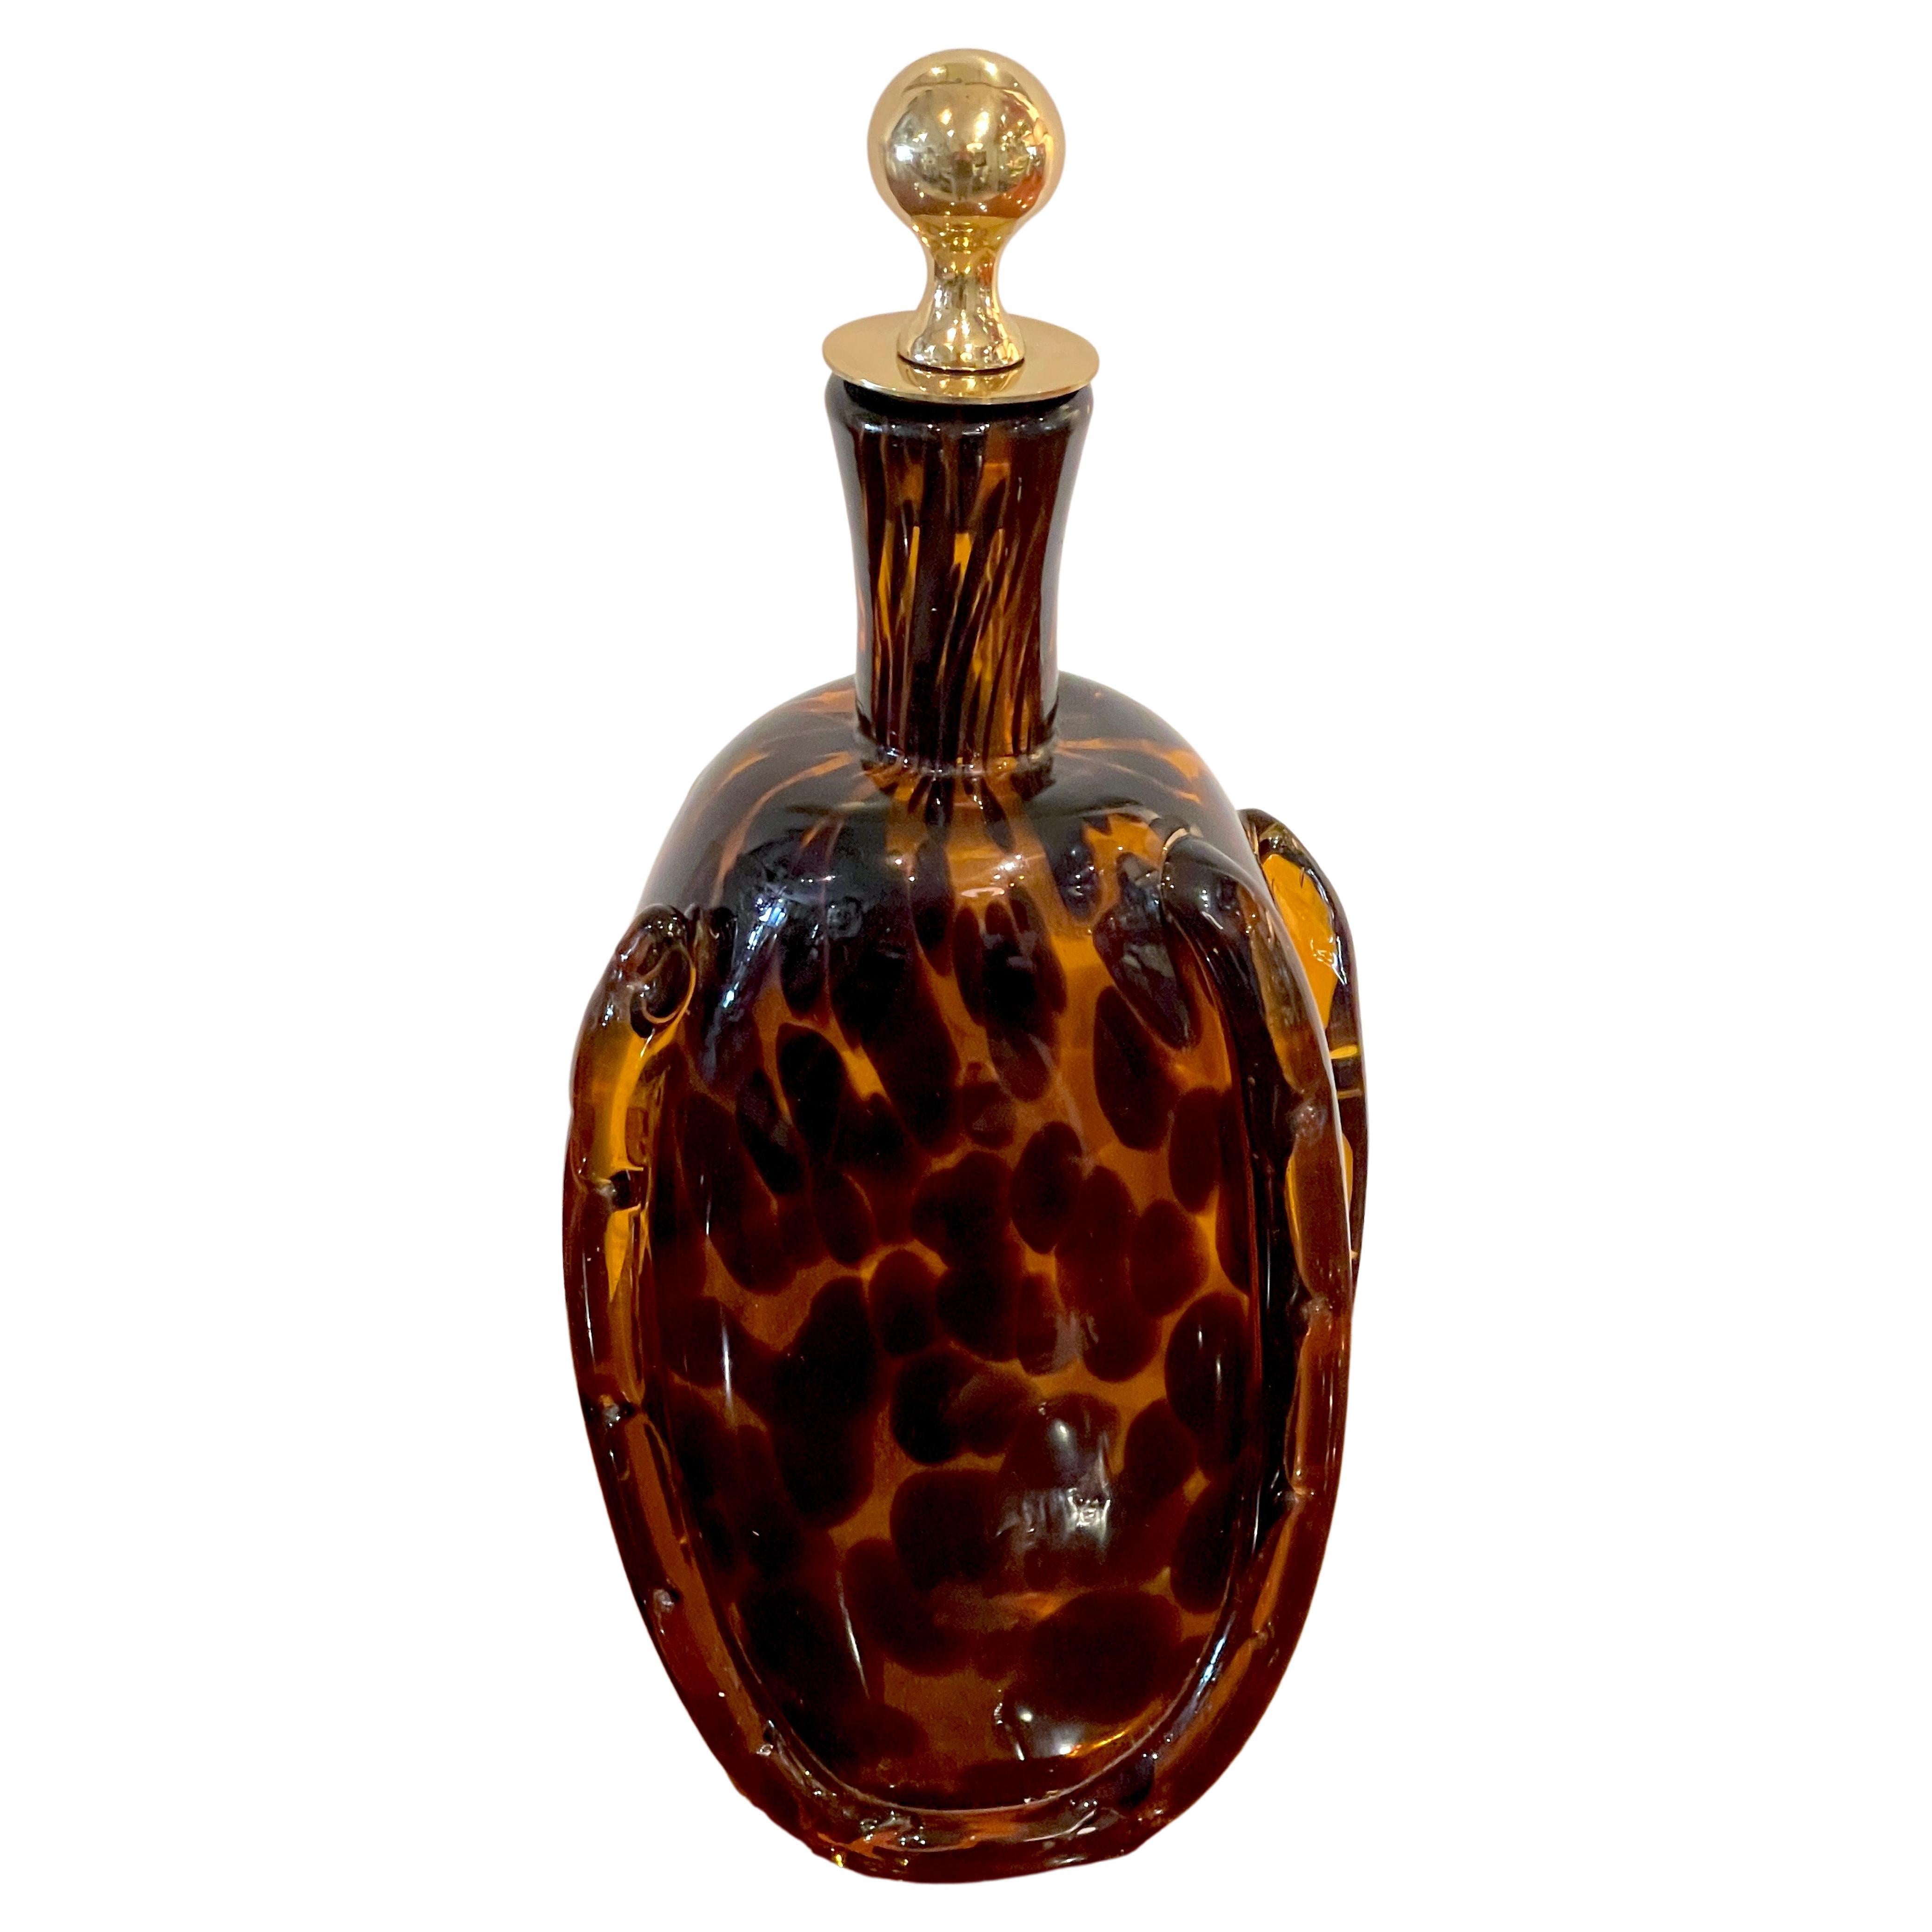 Tortoiseshell Murano glass & brass decanter, attributed to Barovier Toso.
Italy, 1950s
A beautiful example, fitted with its original 2-inch cast brass and cork stopper, the bottle is hand blown in a deep rich earth tones to resemble tortoise